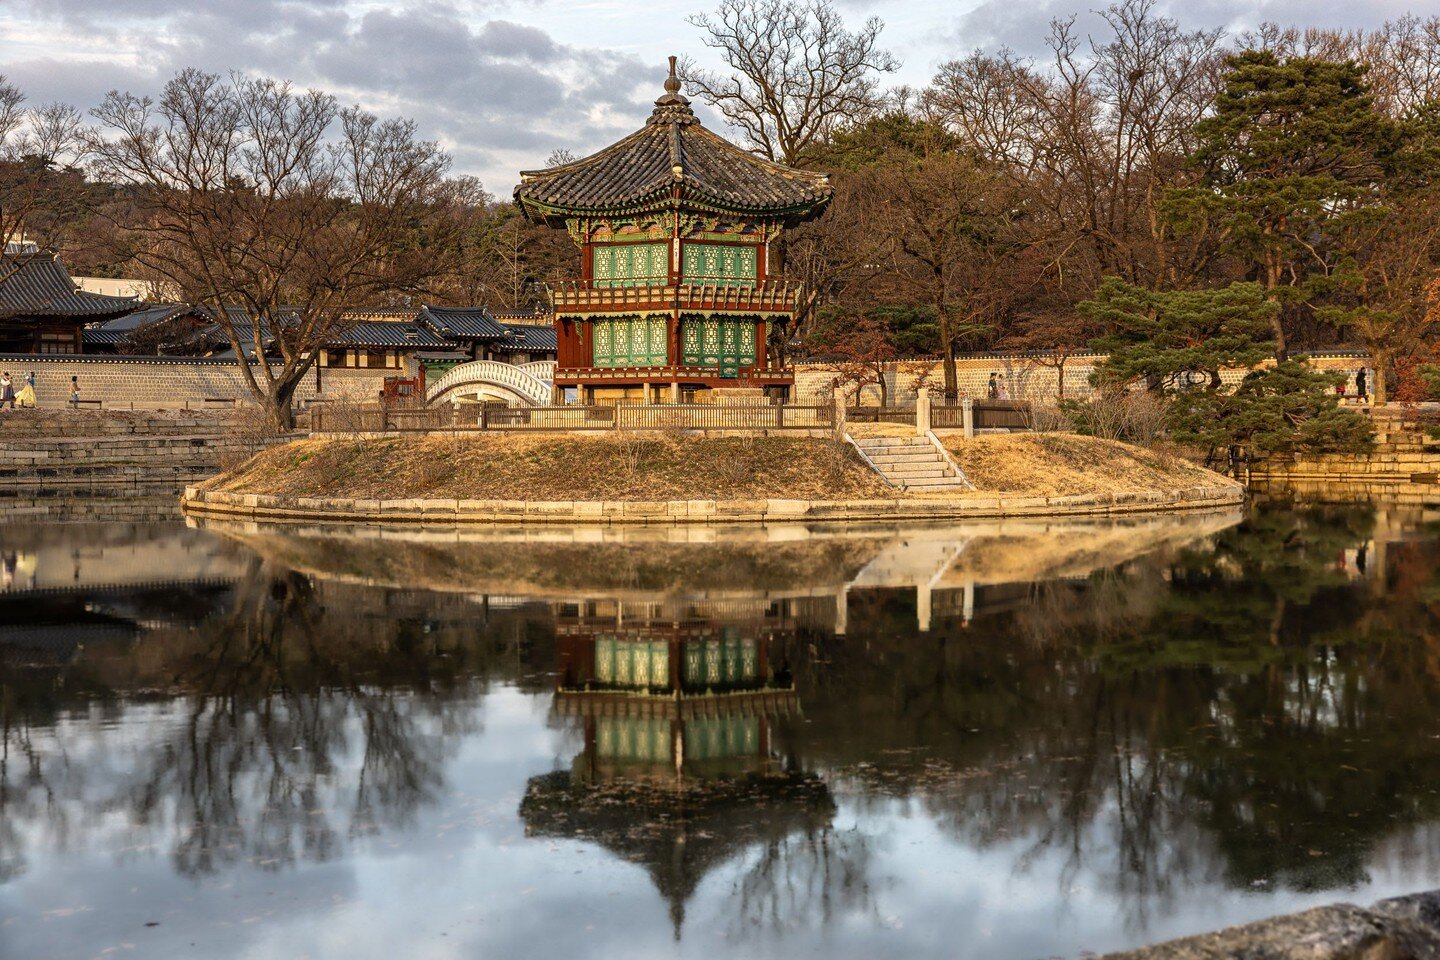 Hyangwonjeong pavilion, one of the iconic sites of Korea, and part of Gyeongbokgung Palace